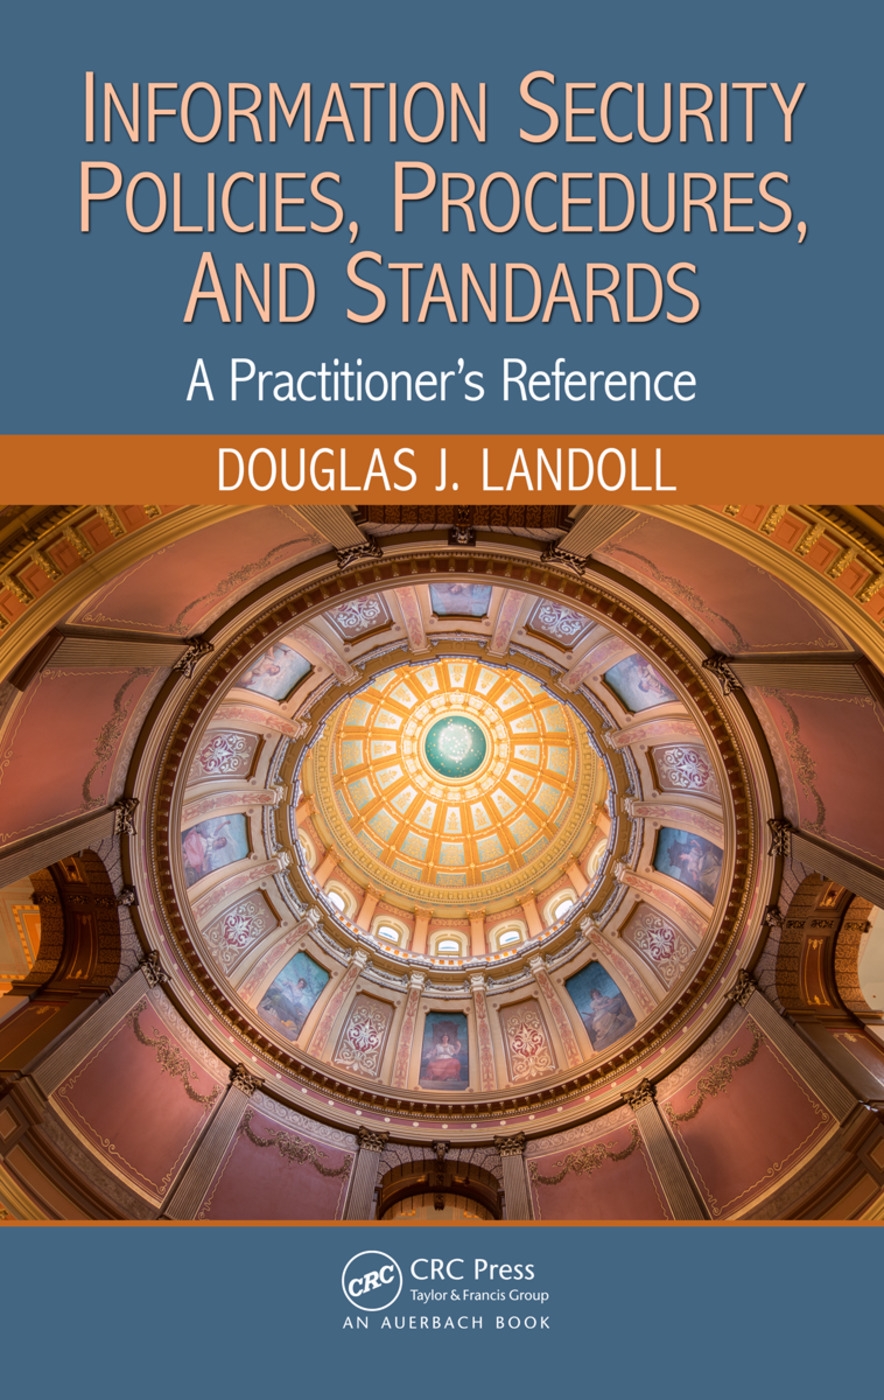 Information Security Policies, Procedures, and Standards: A Practitioner’s Reference